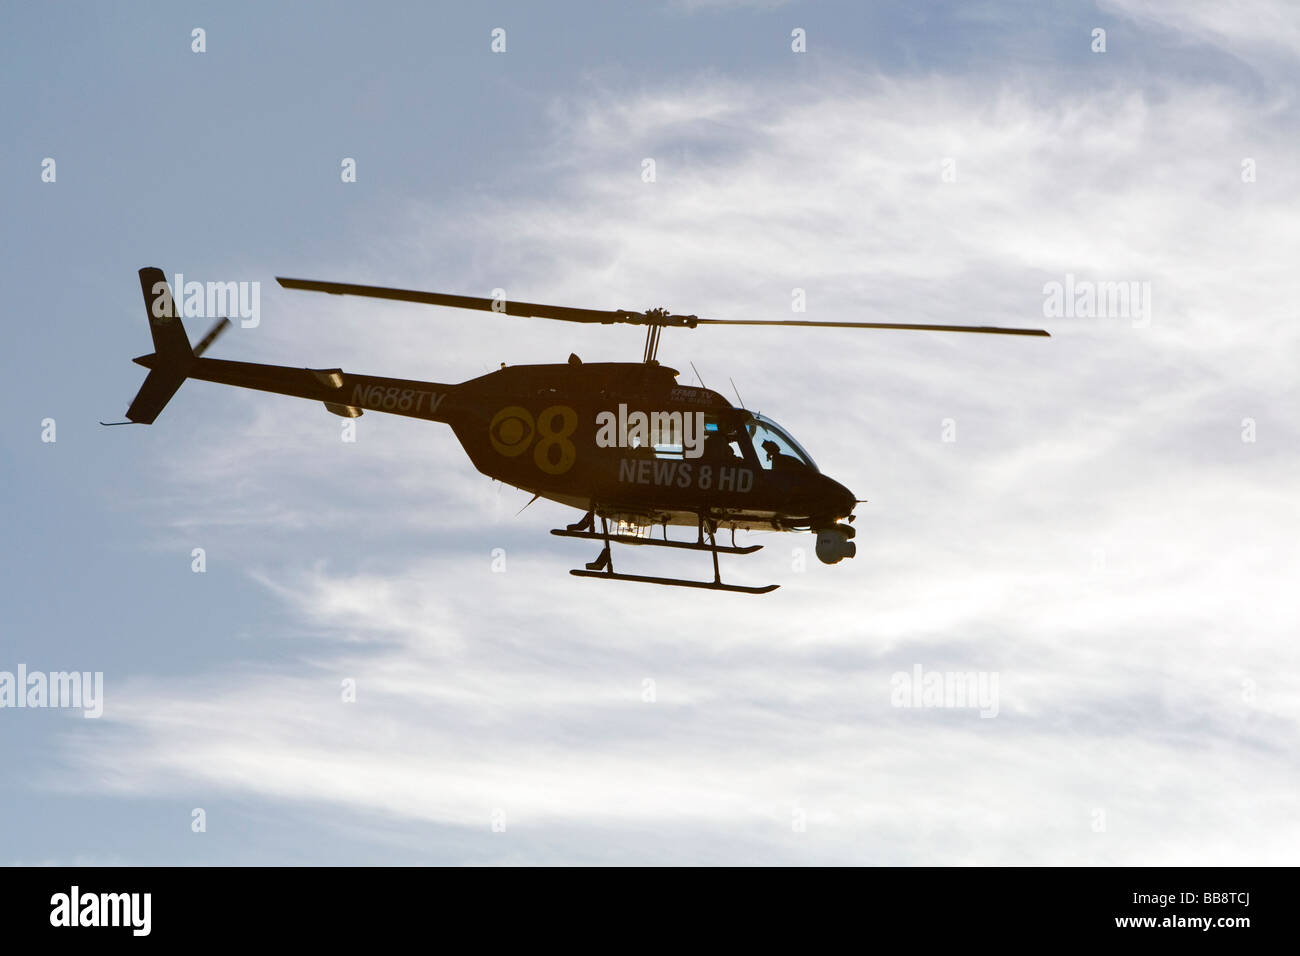 News helicopter flying over Mission Beach in San Diego Southern California USA Stock Photo